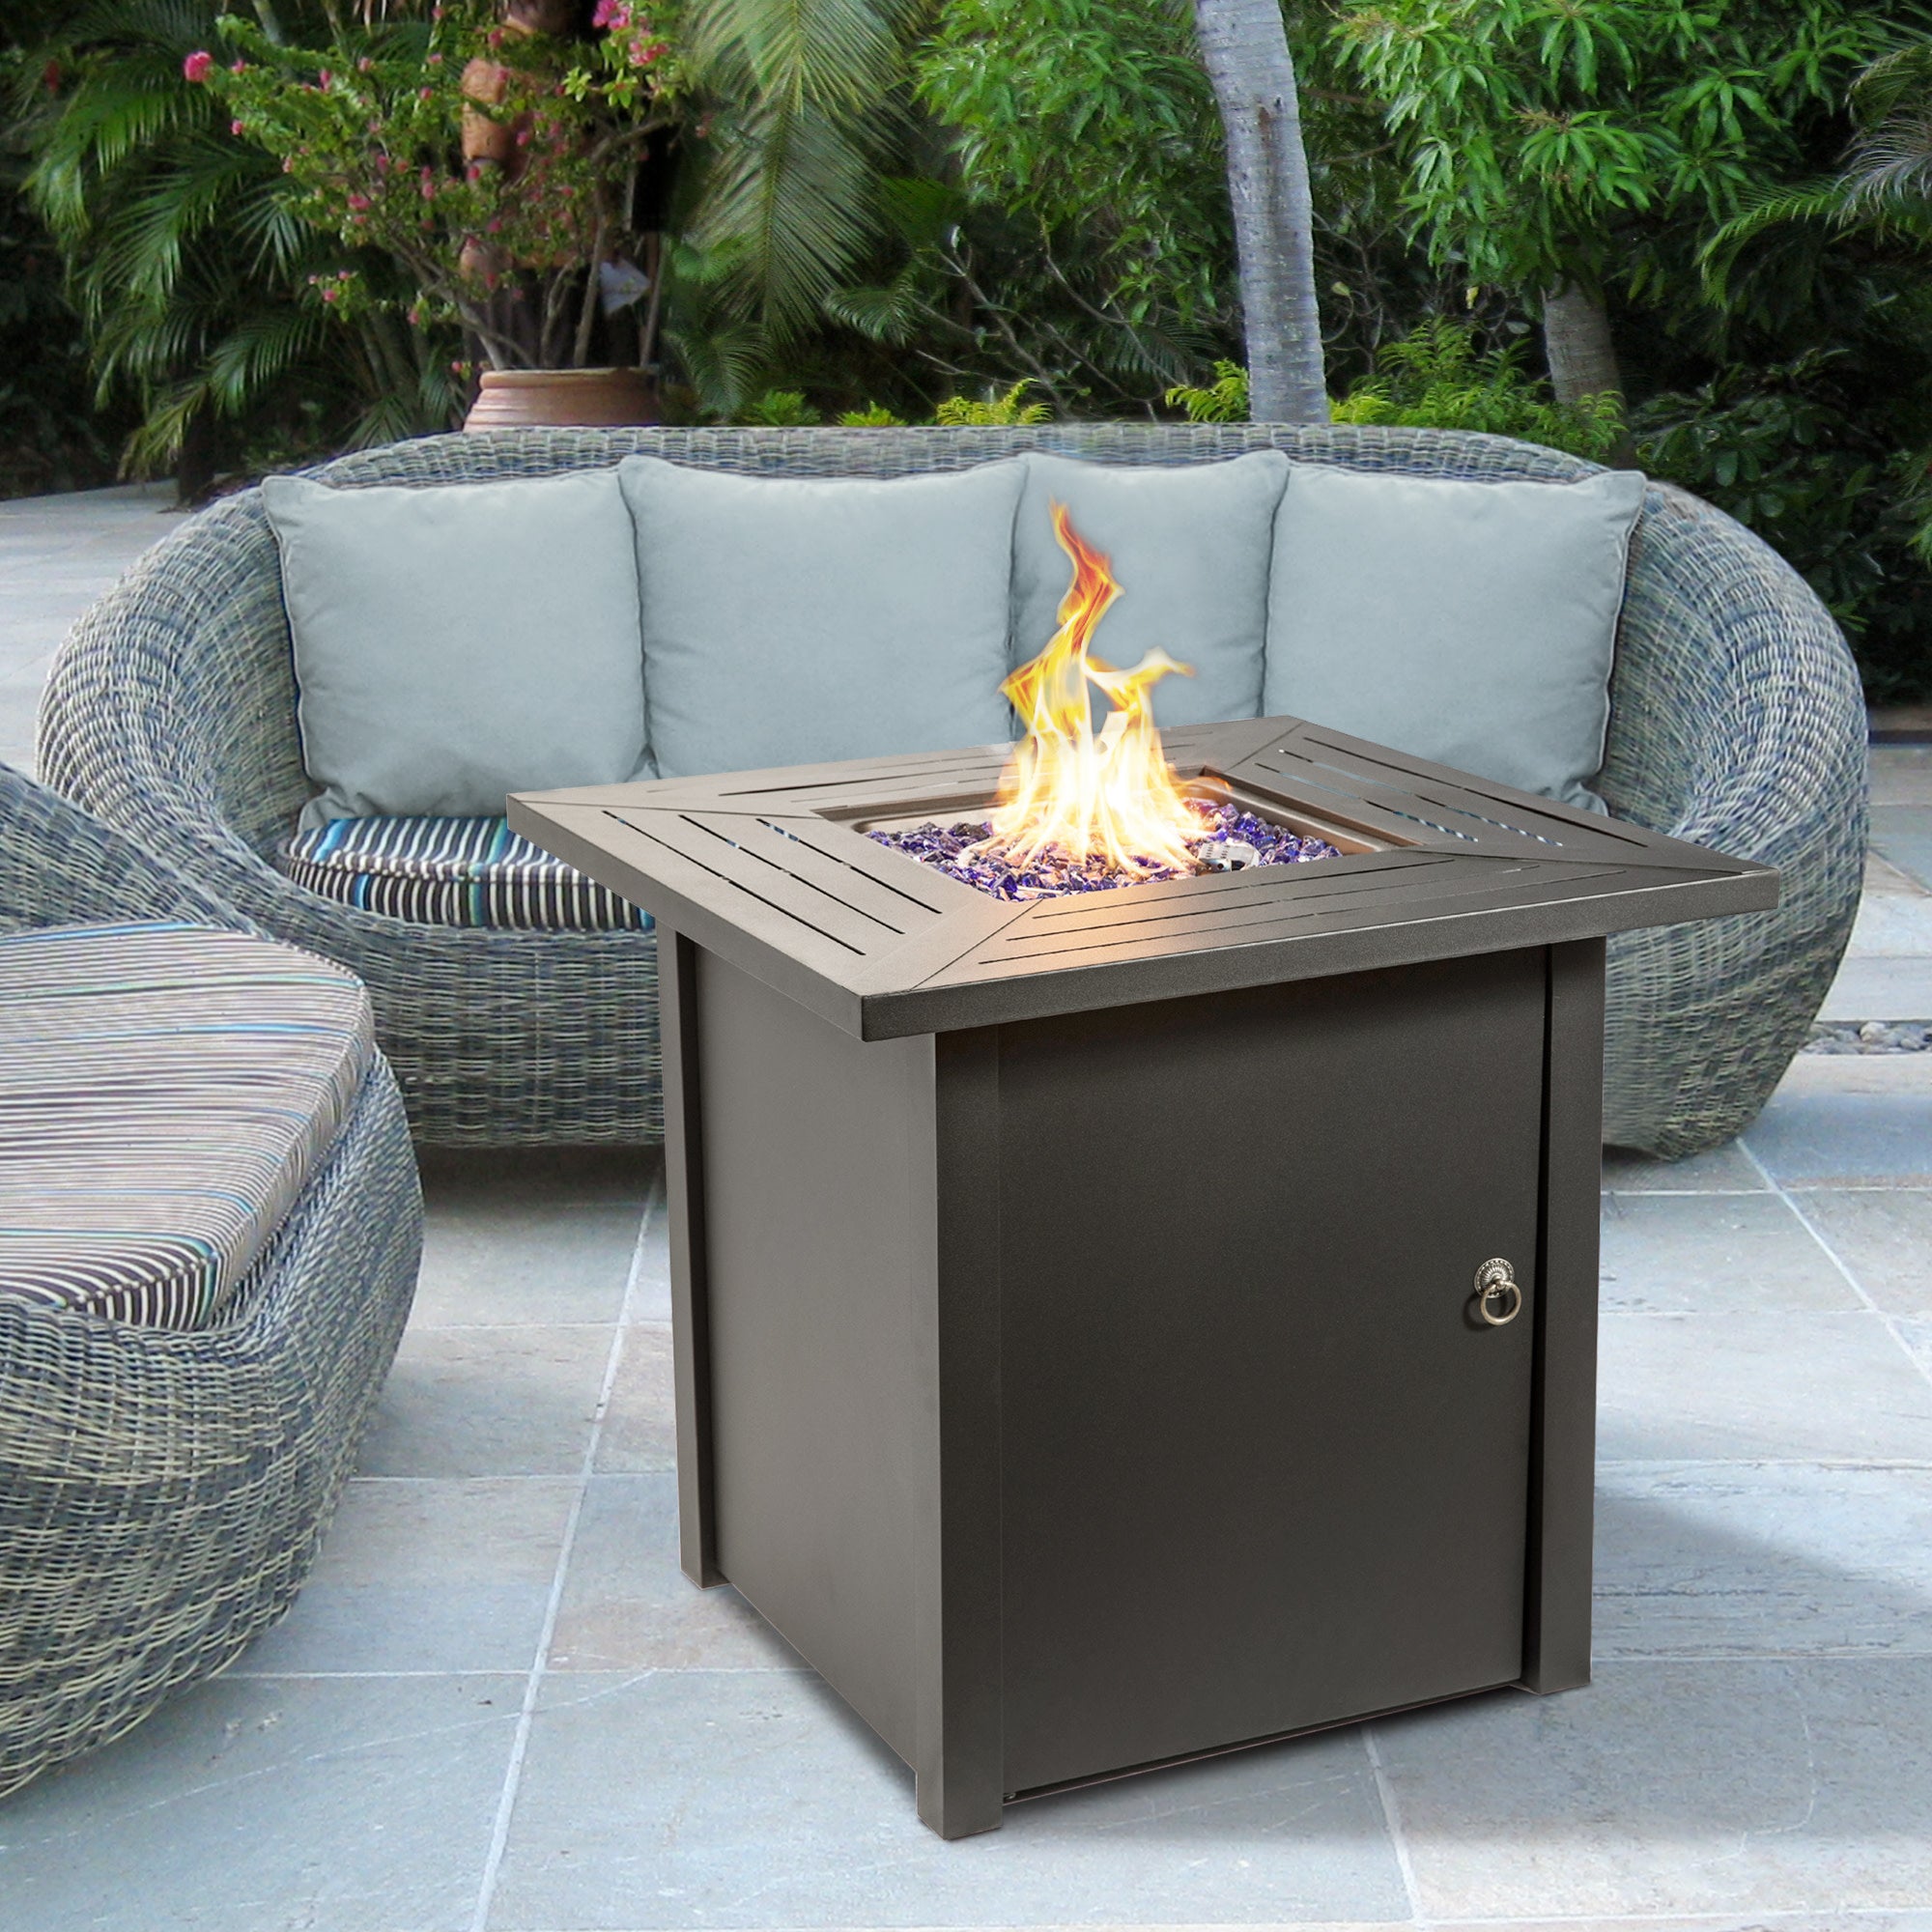 Teamson Home Outdoor Square 30" Propane Gas Fire Pit with Steel Base